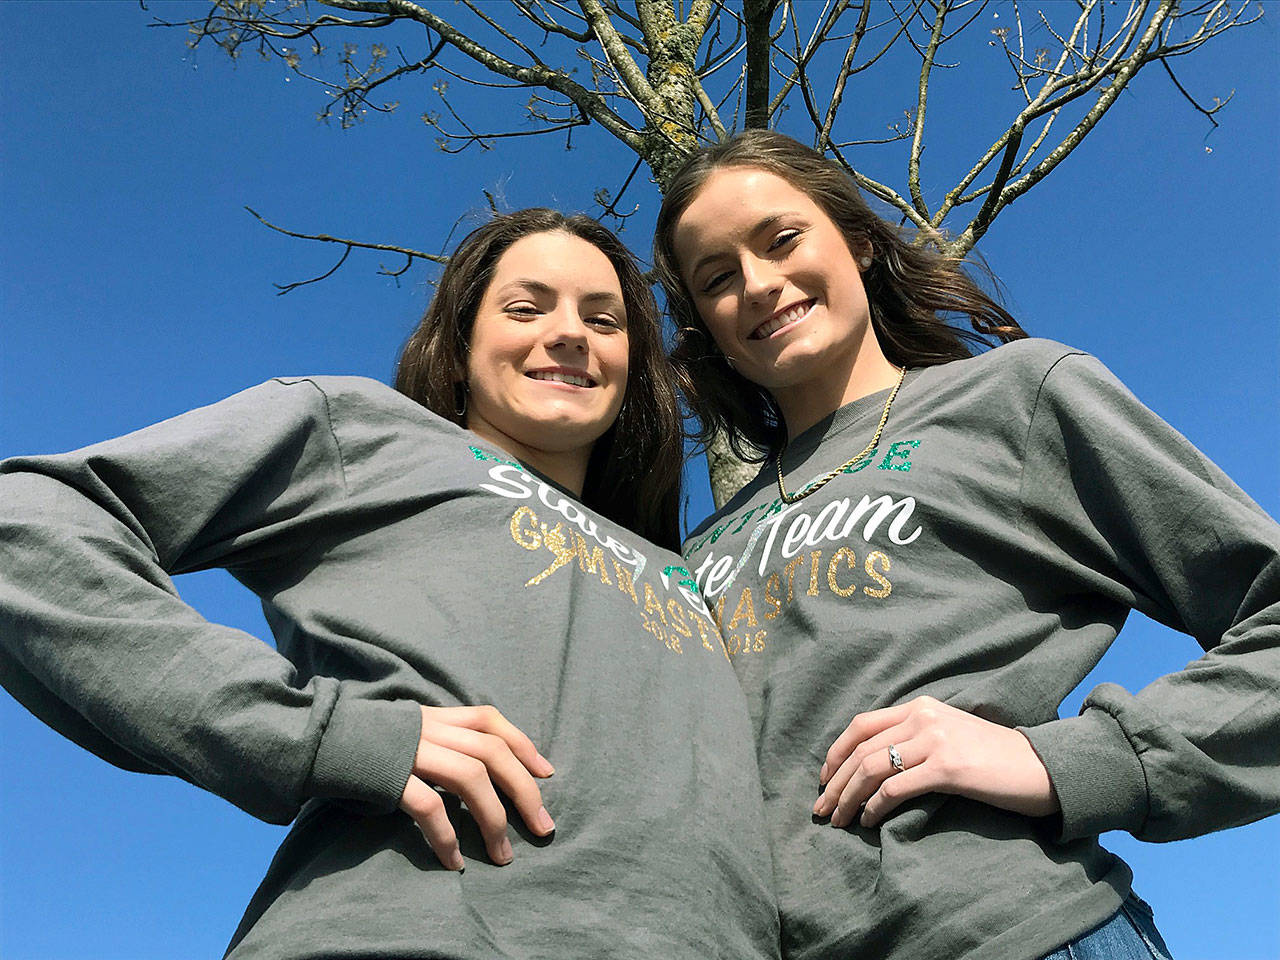 Lizzy, left, and Lexi McKnight helped show the way for Kentridge’s breakout season in gymnastics. Lexi took the 4A all-around title and Lizzy finished 12th as the Chargers competed as a team in the state finals for the first time in program history. MARK KLAAS, Kent Reporter